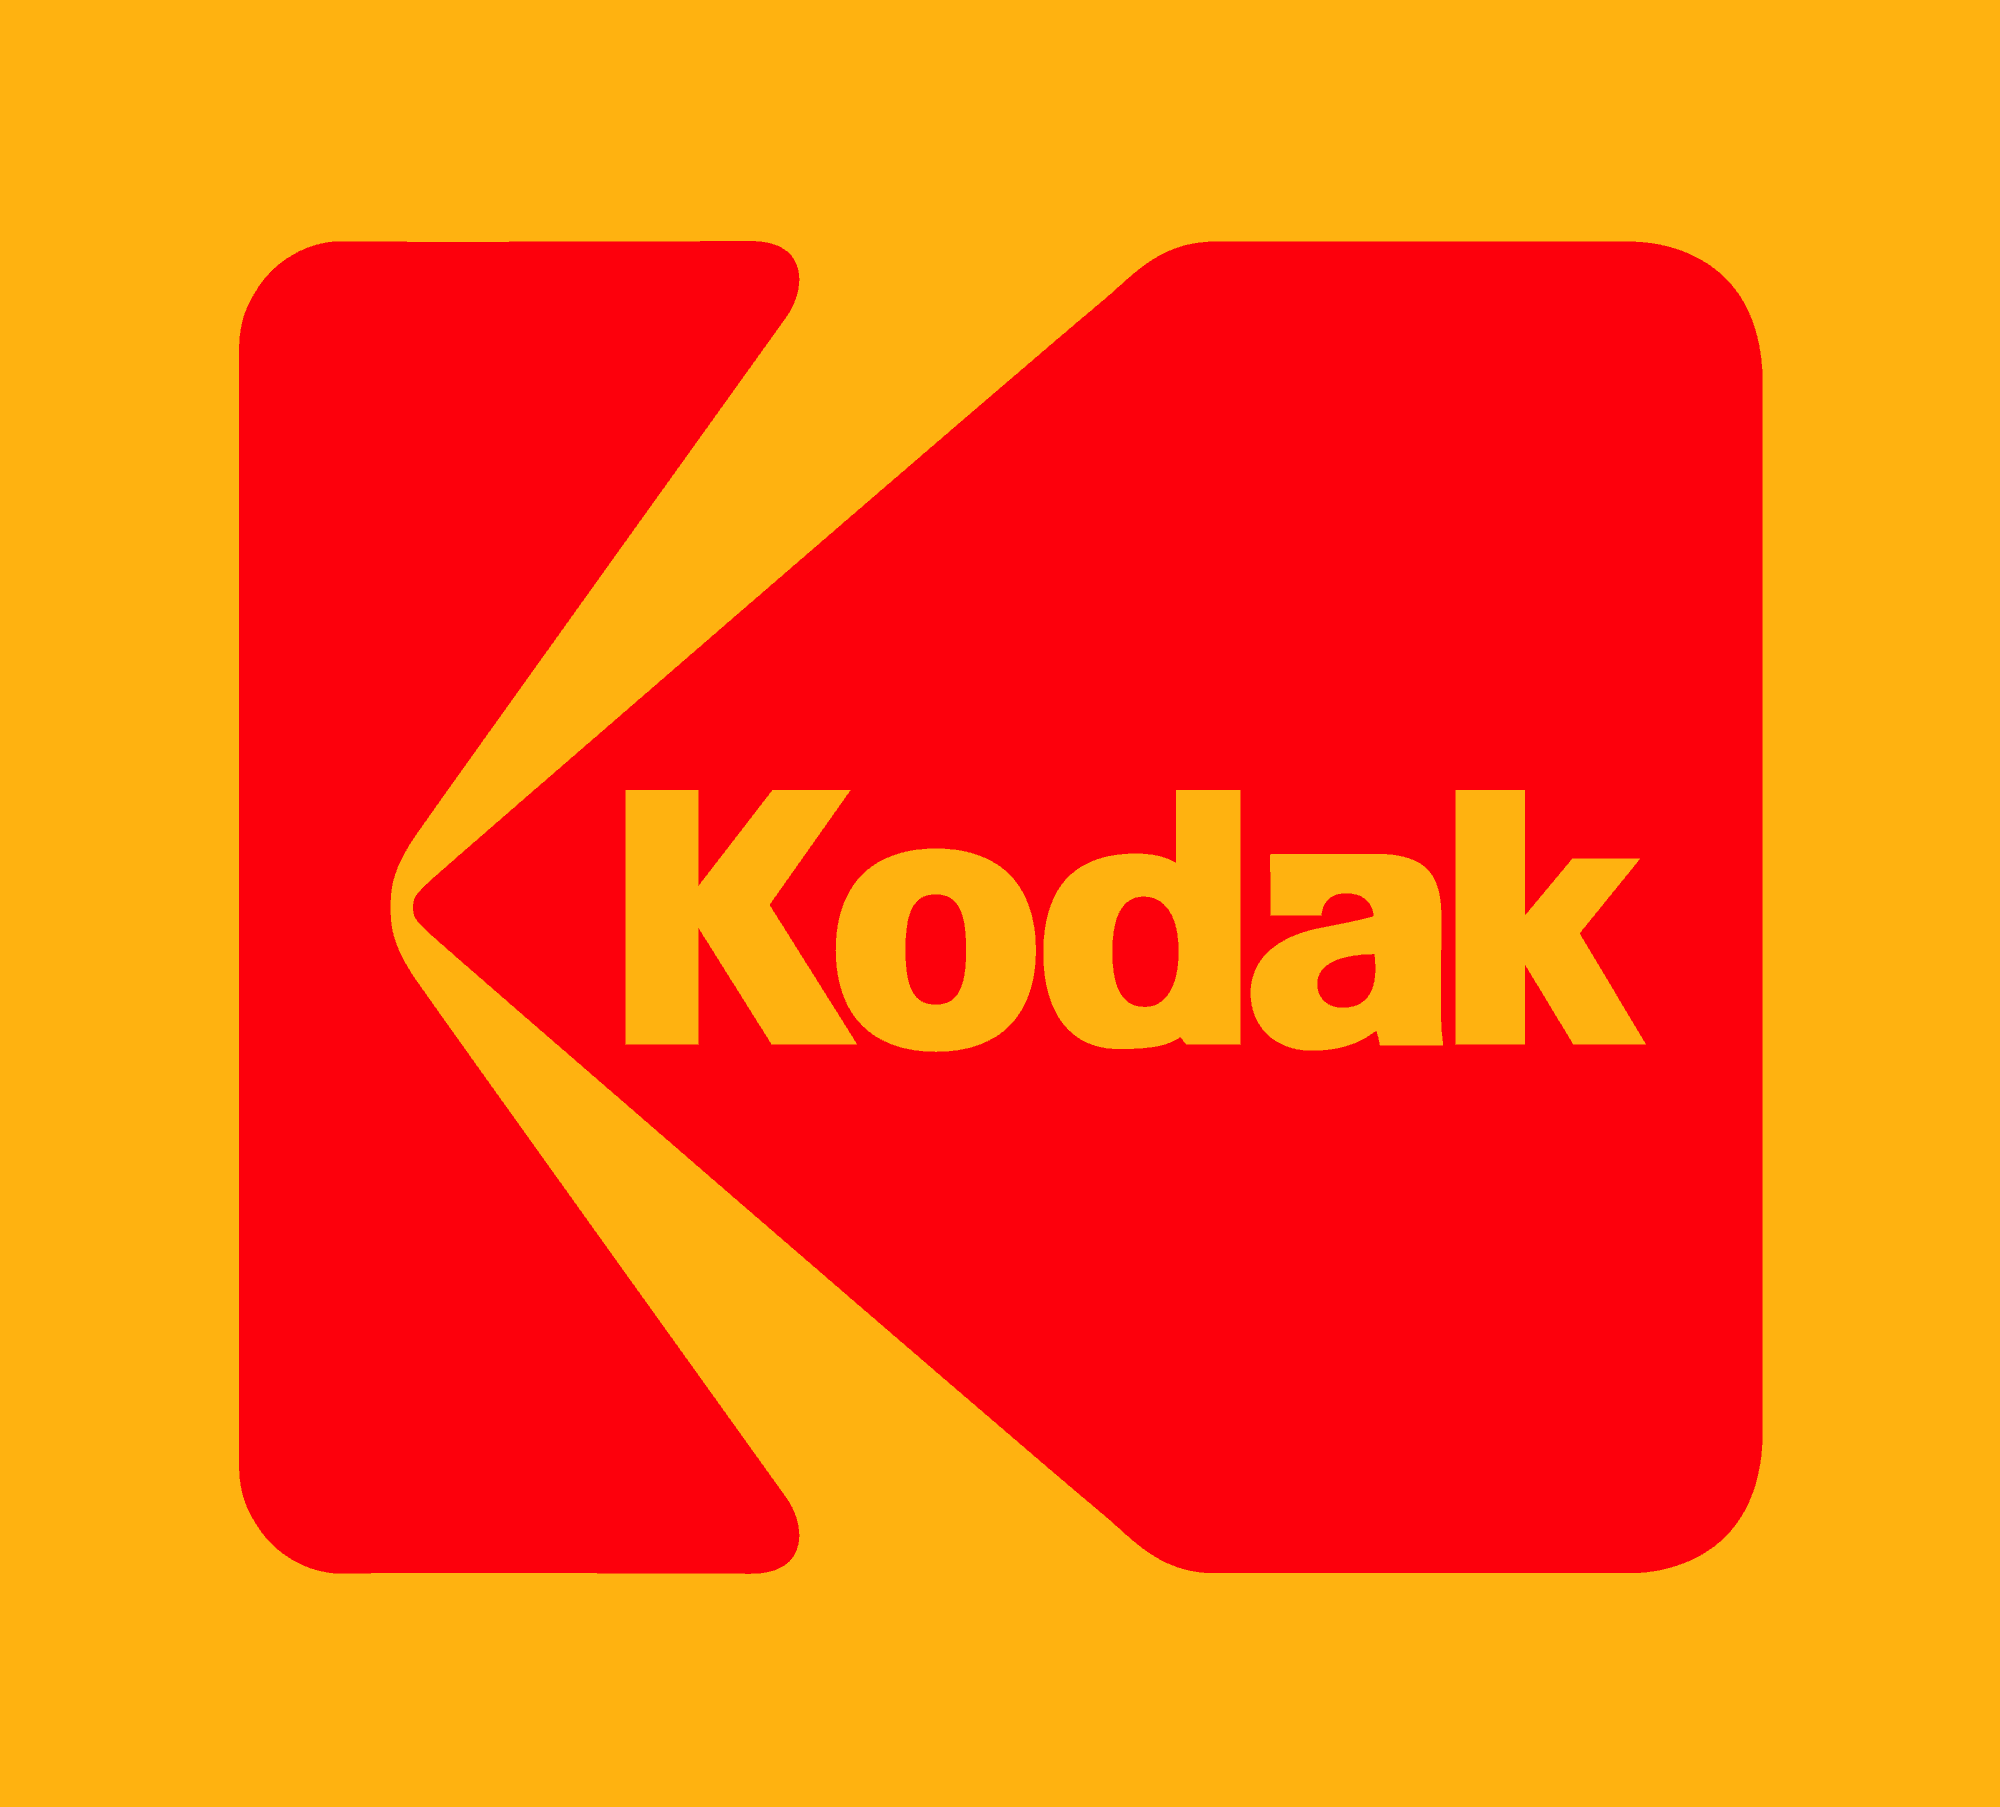 The kodak logo on a yellow background represents the innovative nature of technology startups, capturing the attention of CEOs and business coaches.